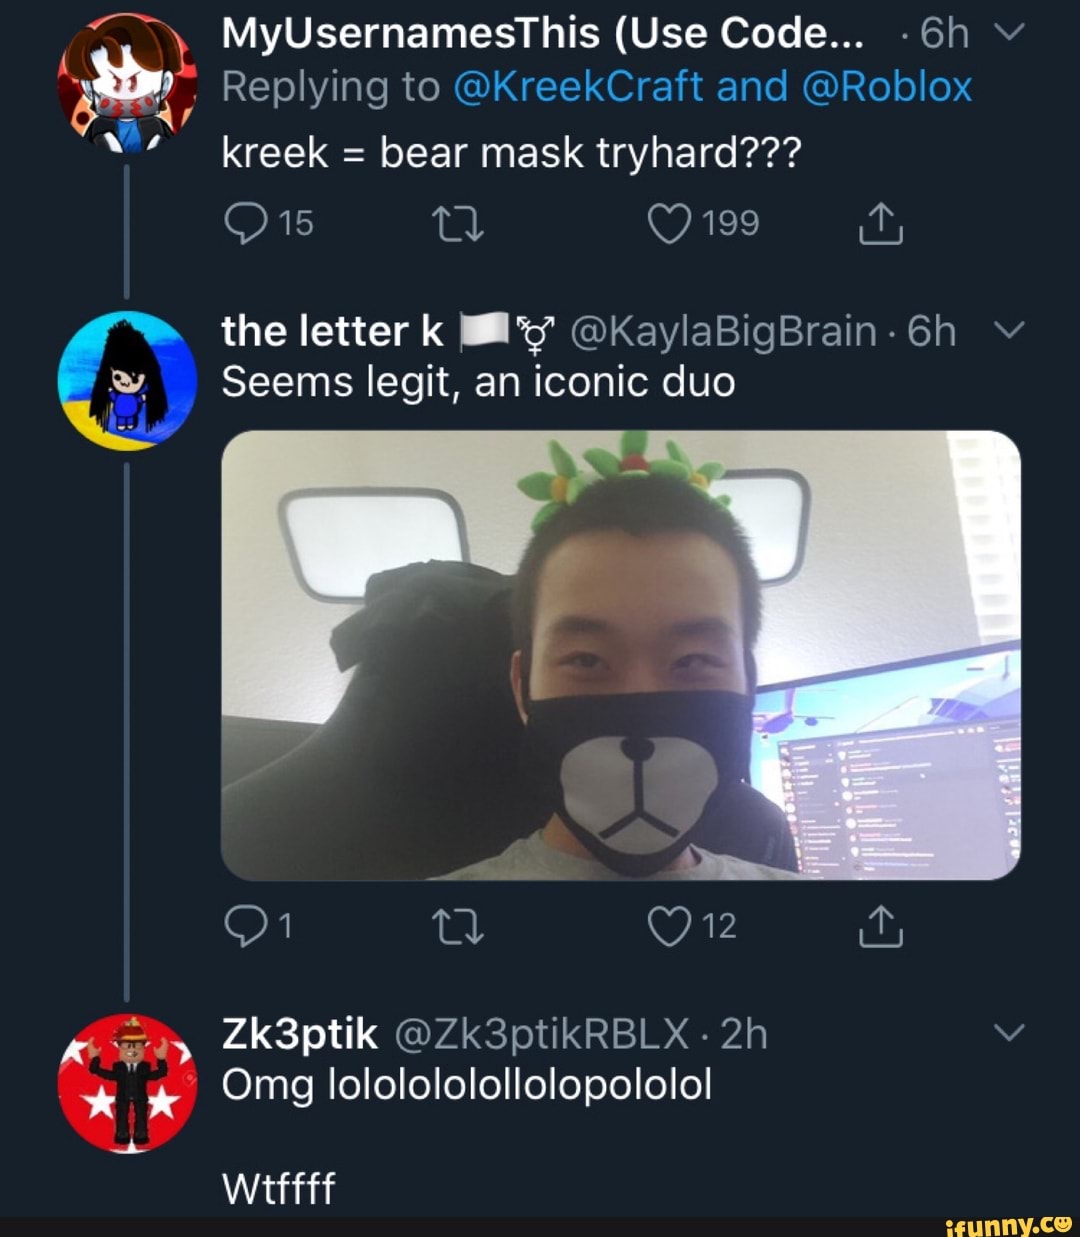 Myusernamesthis Use Code 6h Replying To Kreekcraft And Roblox Kreek Bear Mask Tryhard The Letter K By Okaylabigbrain 6h Y Seems Legit An Iconic Duo Omg Lololololollolopololo Ifunny - roblox code for bear mask